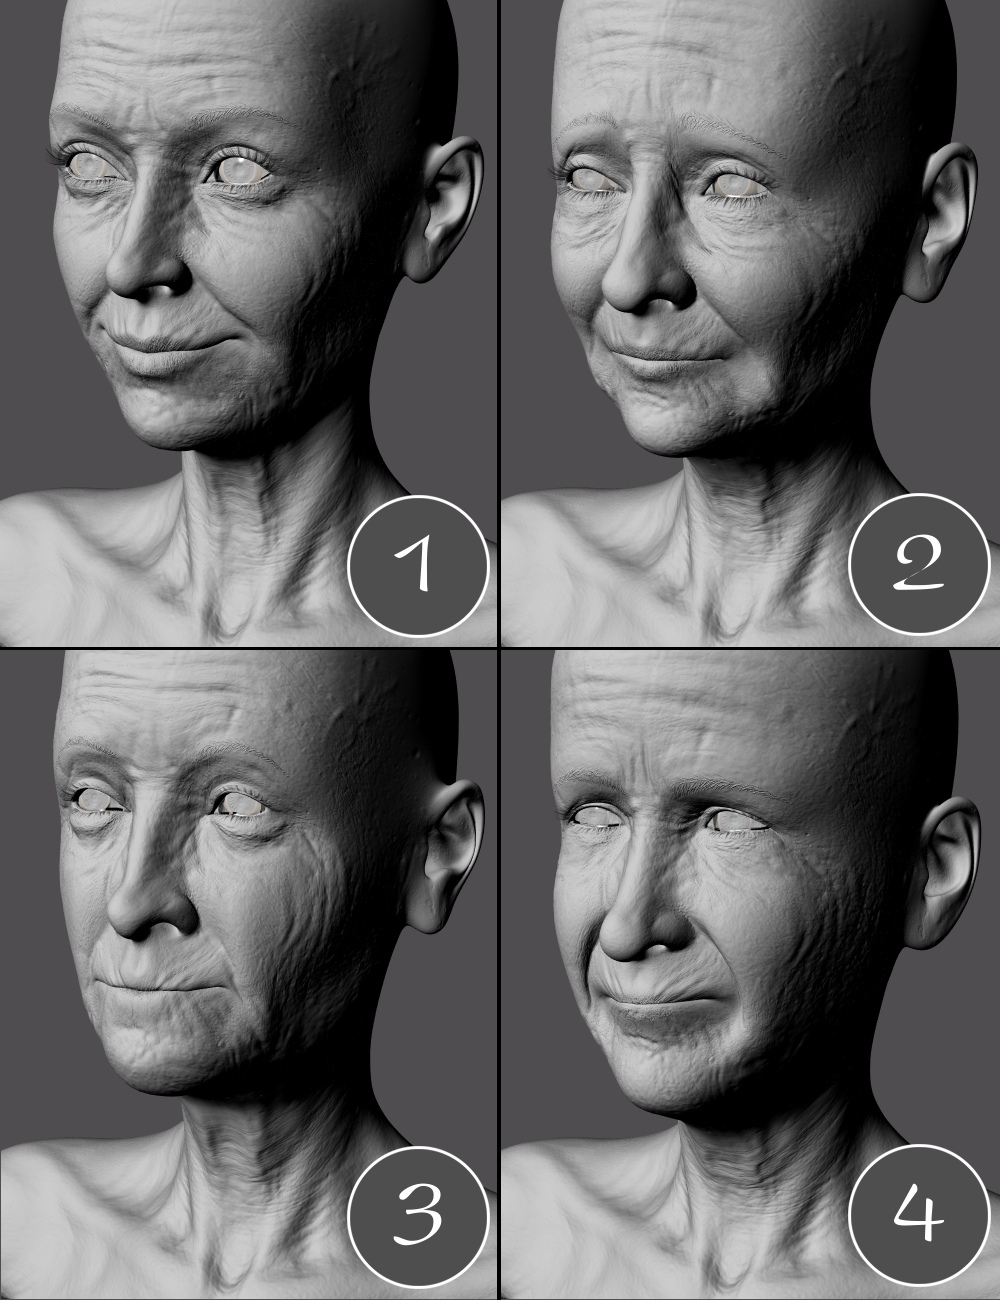 Various Faces for Mabel 8 by: AlFan, 3D Models by Daz 3D